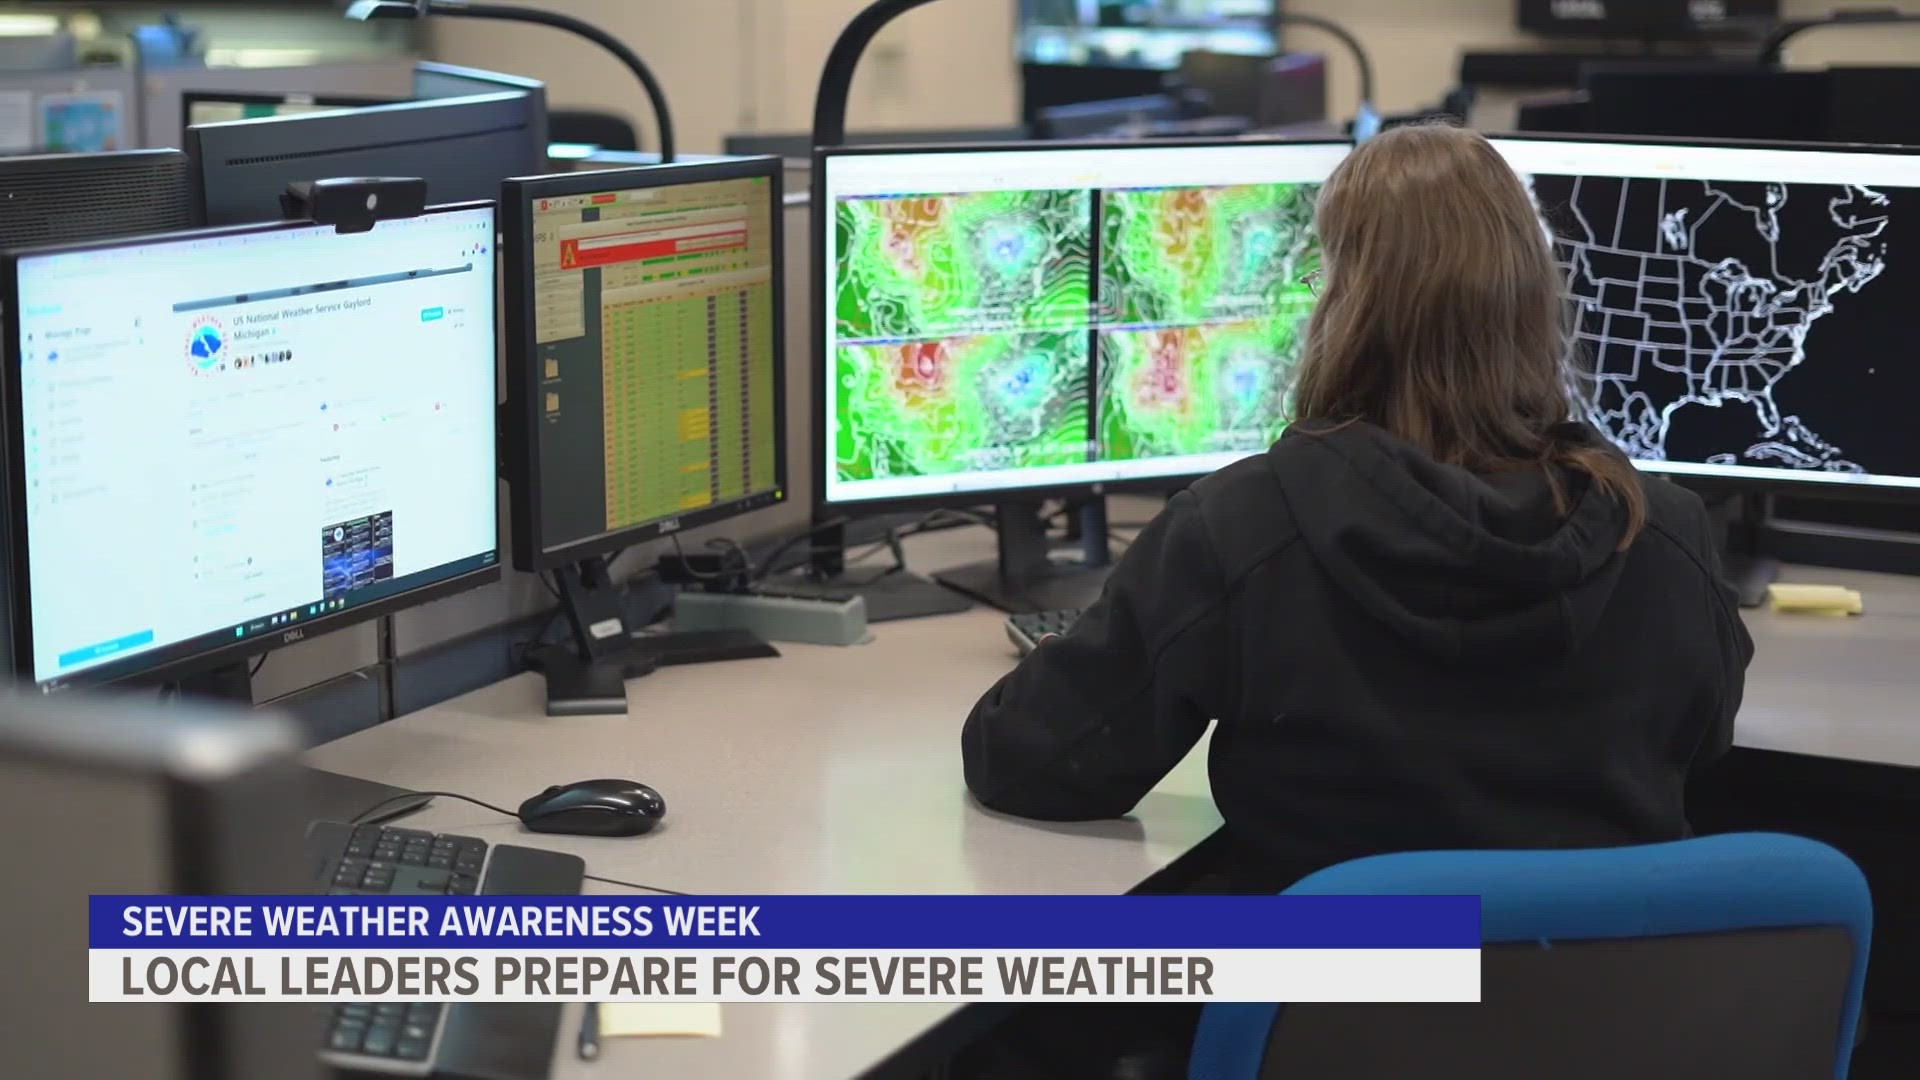 To recognize Severe Weather Awareness Week, local leaders are revisiting their severe weather plans.